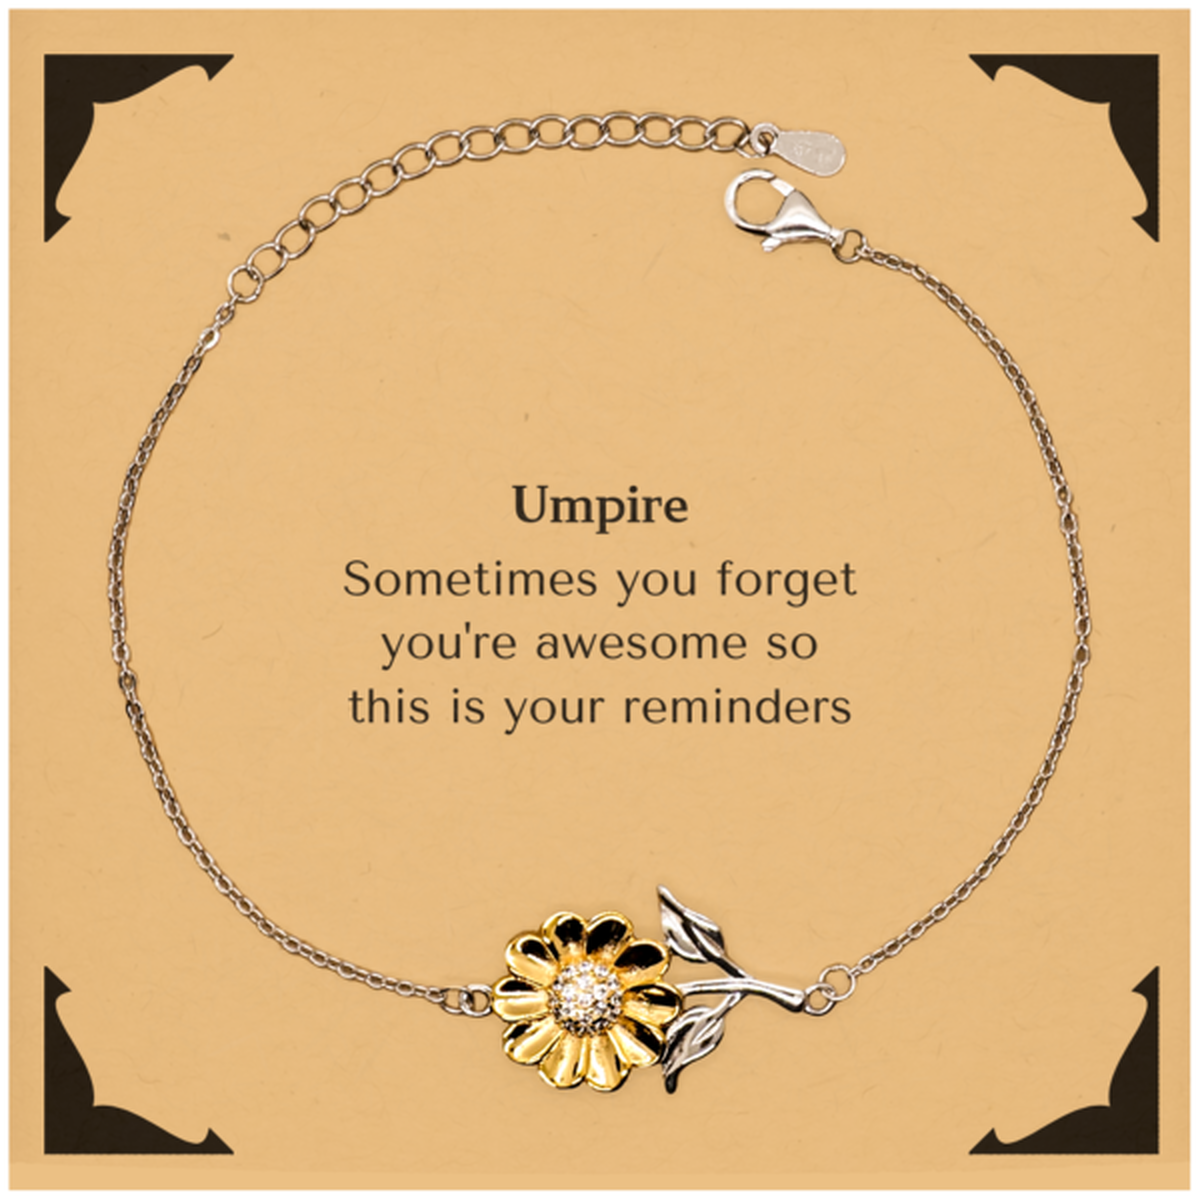 Sentimental Umpire Sunflower Bracelet, Umpire Sometimes you forget you're awesome so this is your reminders, Graduation Christmas Birthday Gifts for Umpire, Men, Women, Coworkers